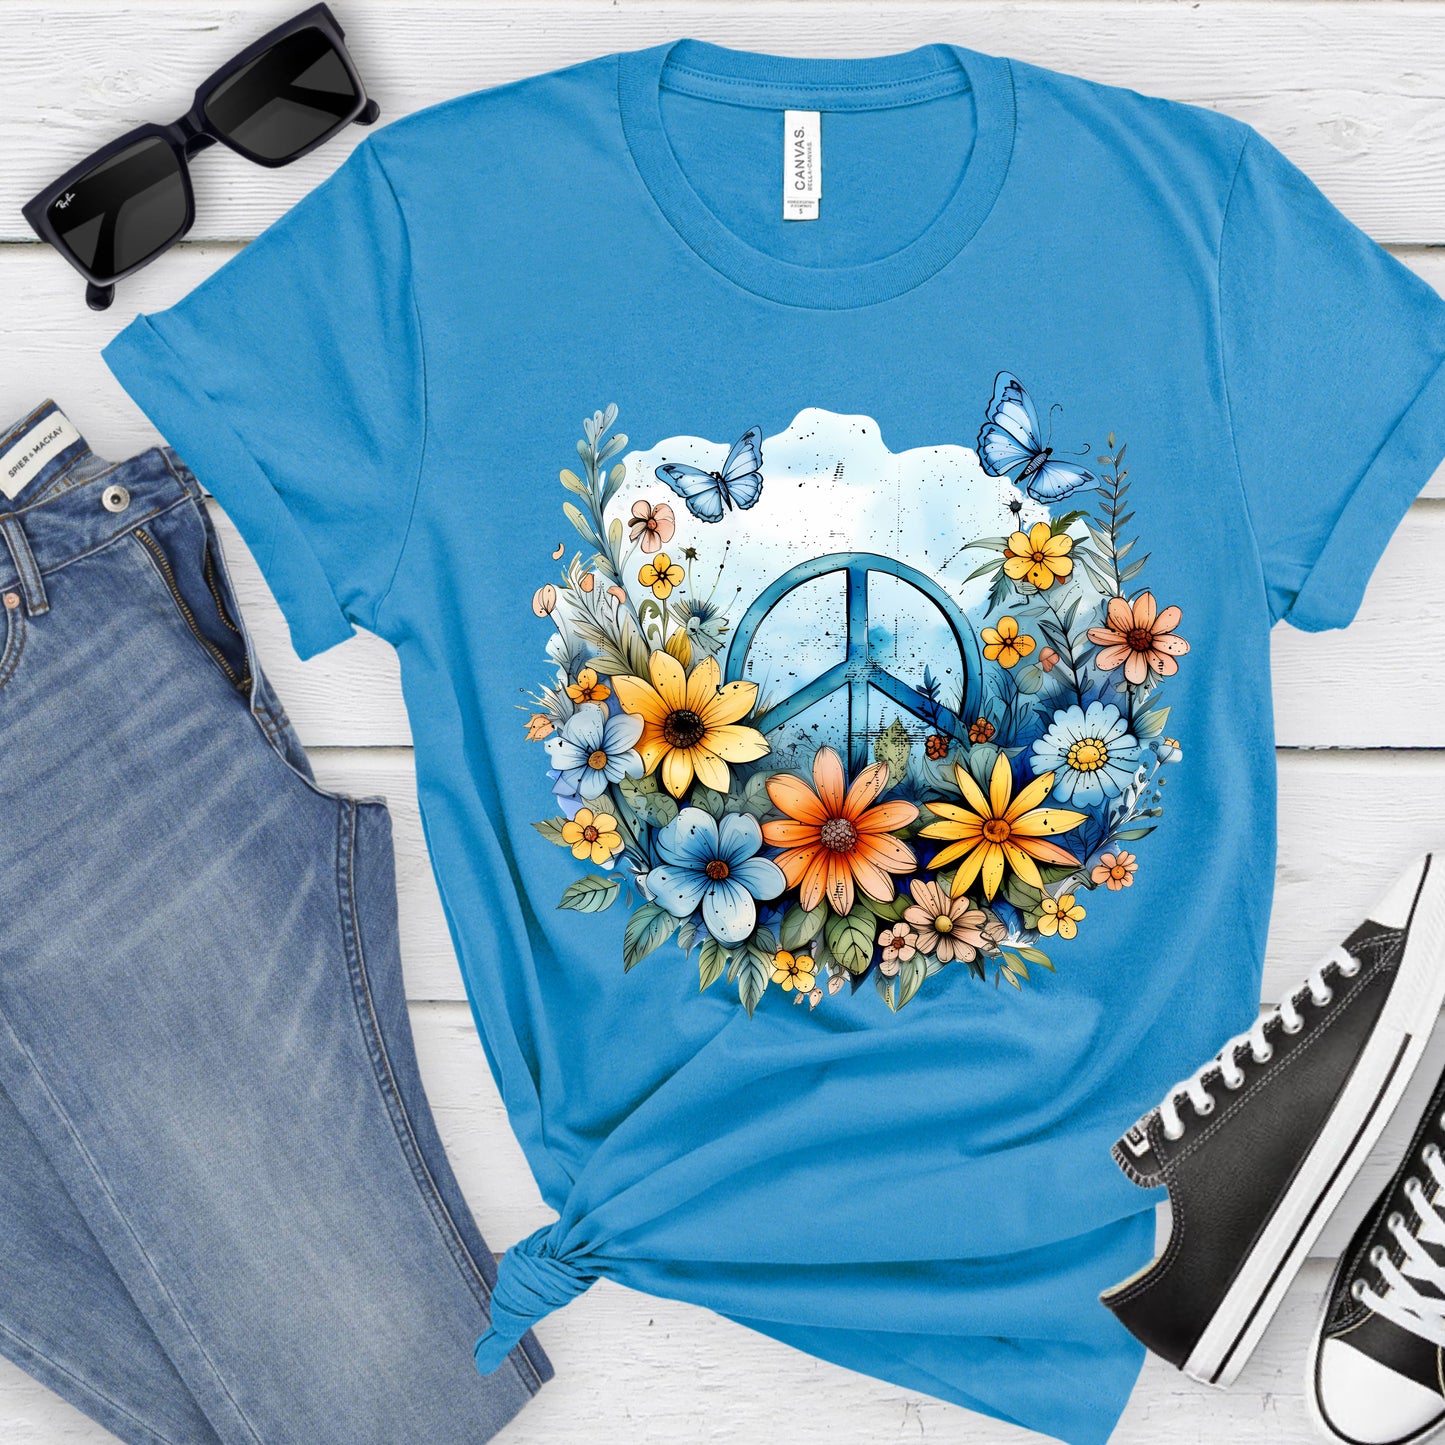 Peaceful Feelings:  Peace Sign Short Sleeve T-Shirt With Flowers and Butterflies